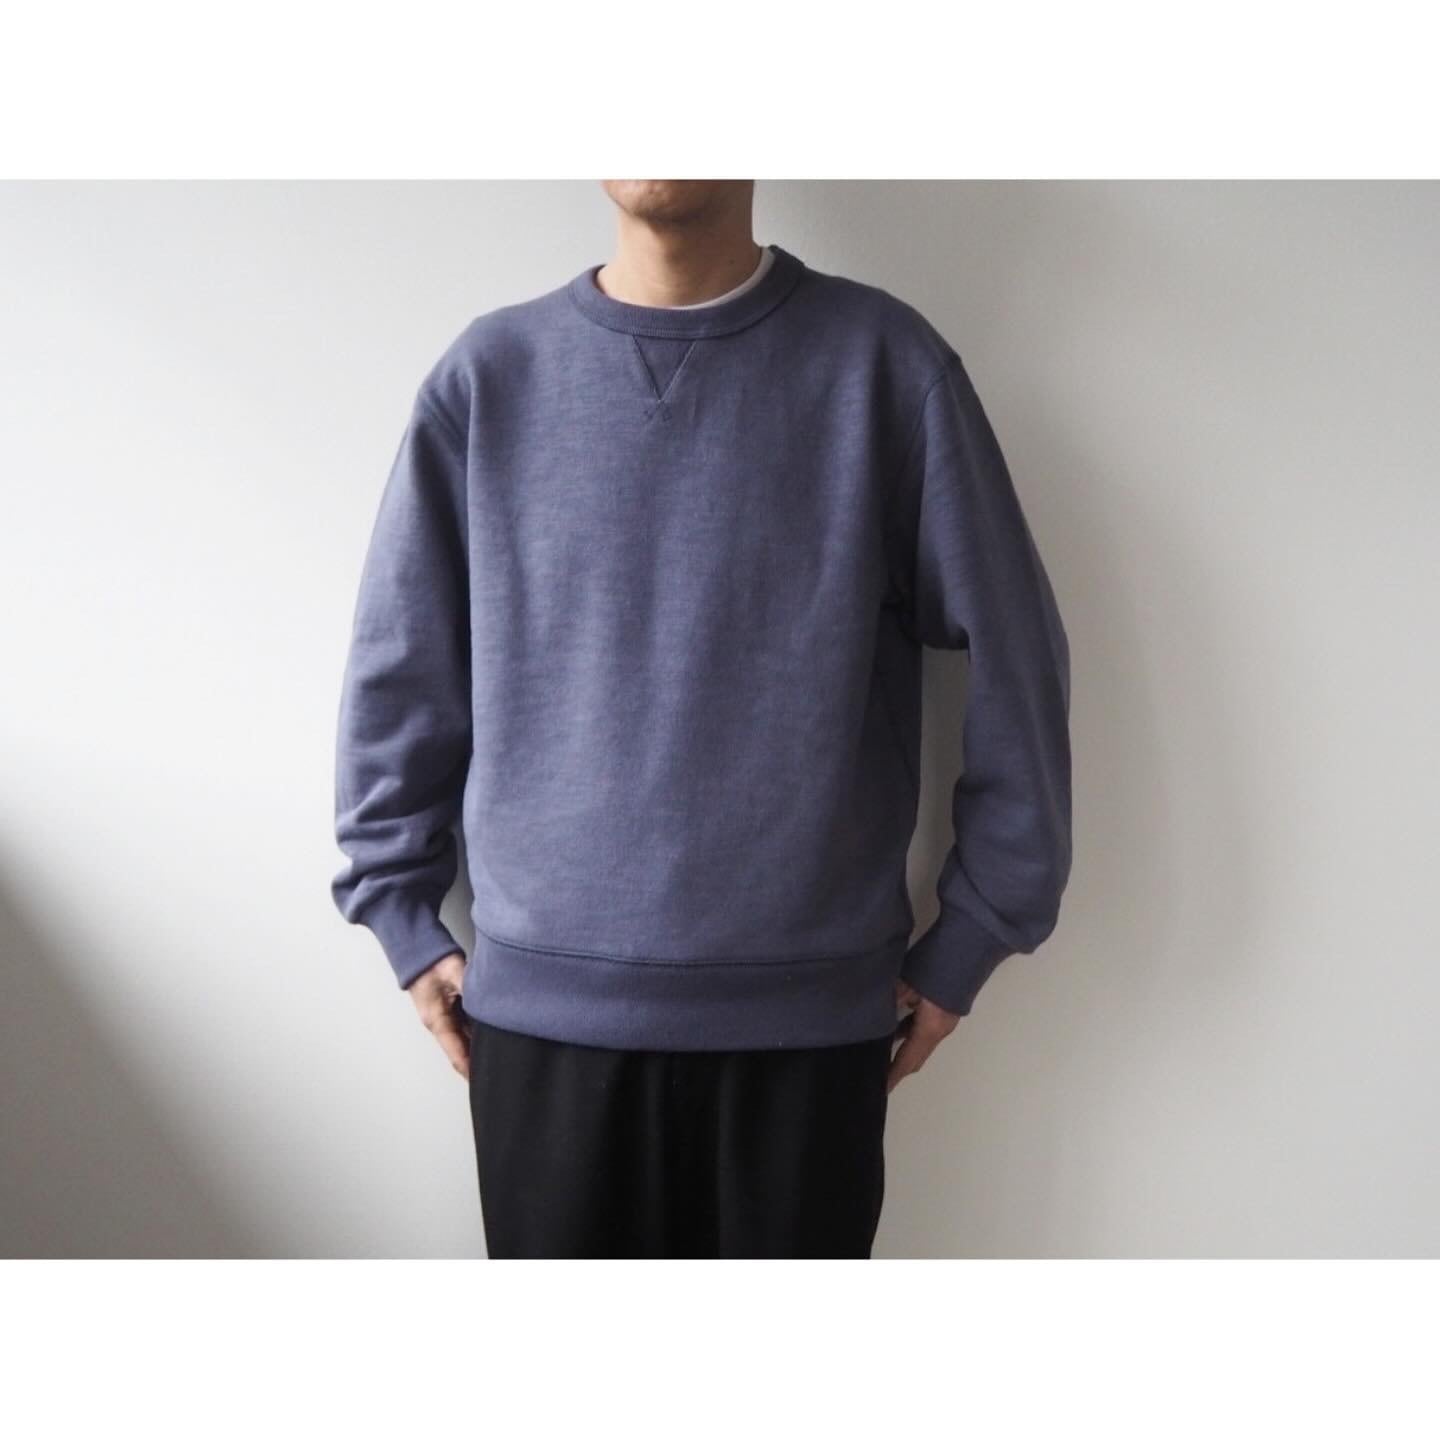 Jackman(ジャックマン) GG Sweat Crewneck | AUTHENTIC Life Store powered by BASE